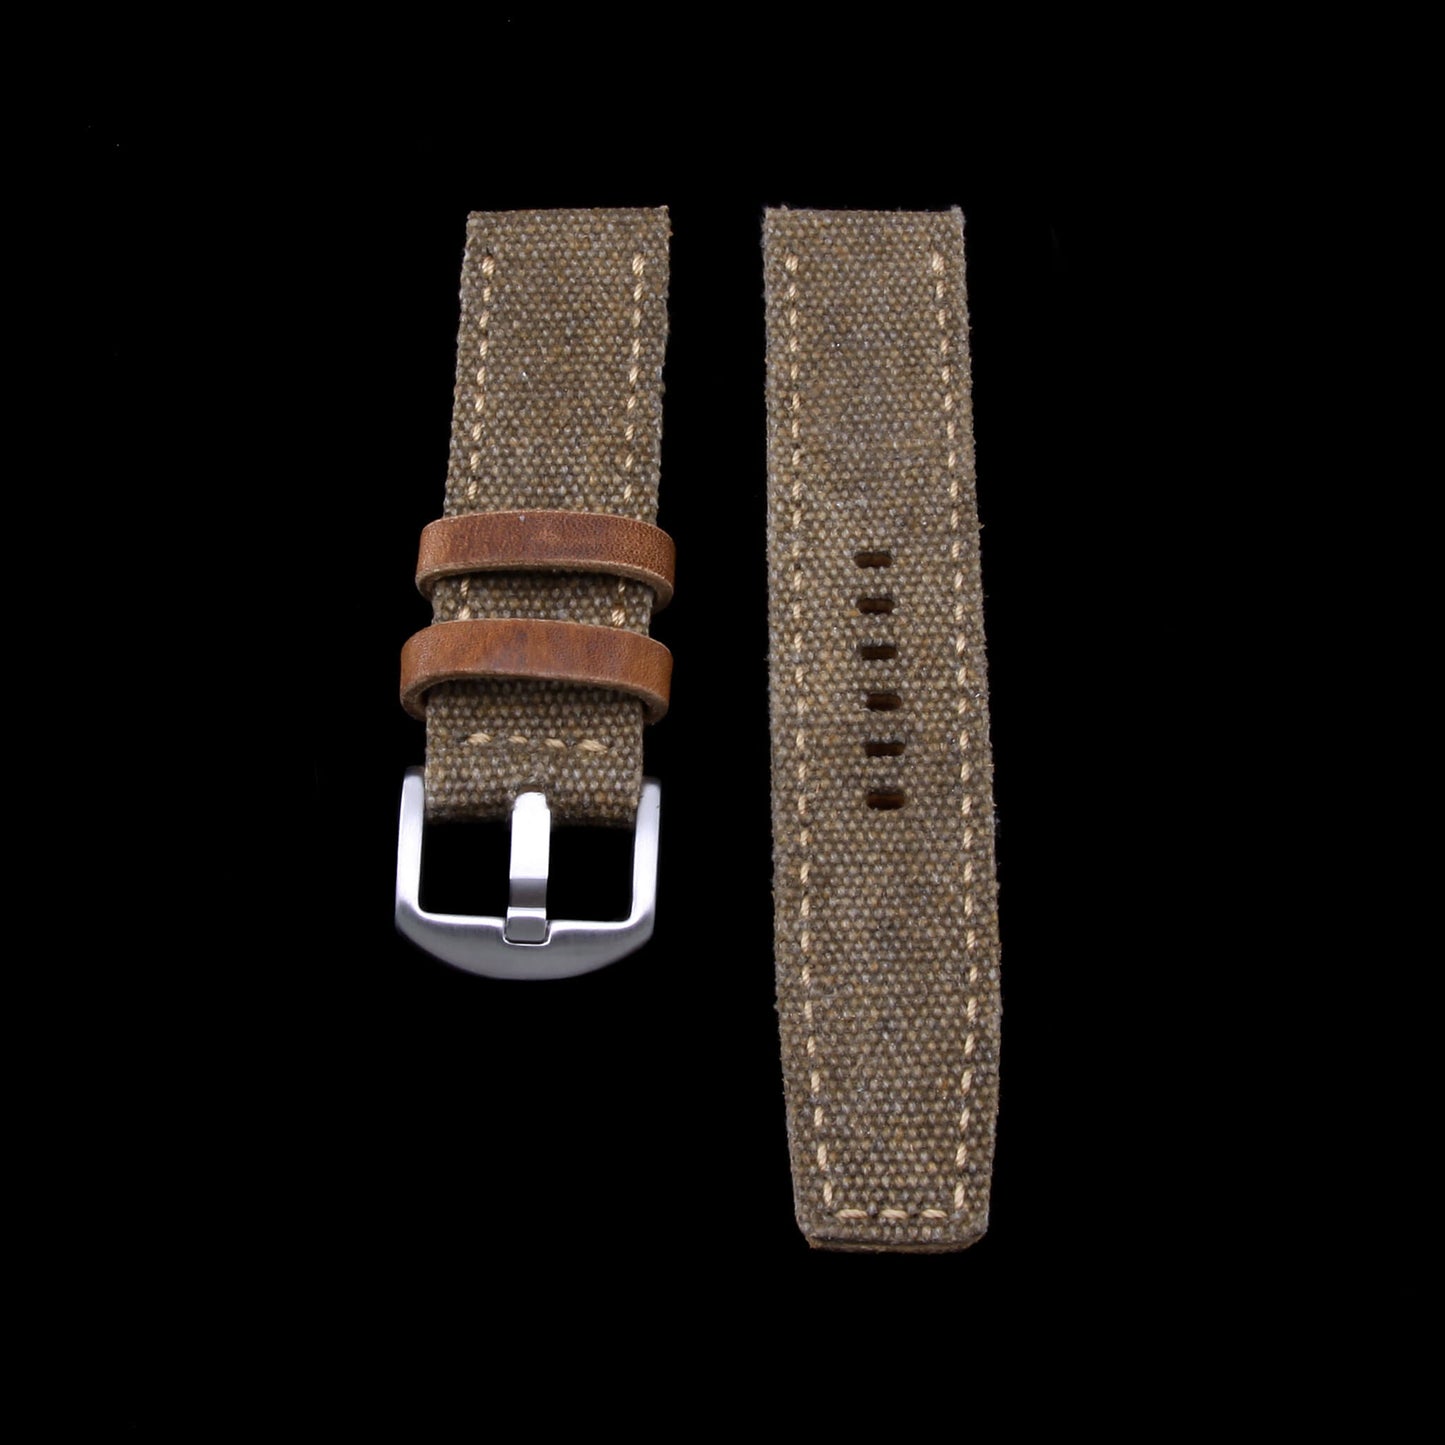 2nd View of 2-Piece Full Stitch Leather Watch Strap, made with Rustic Brown Canvas and Italian veg-tanned leather lining, handcrafted by Cozy Handmade